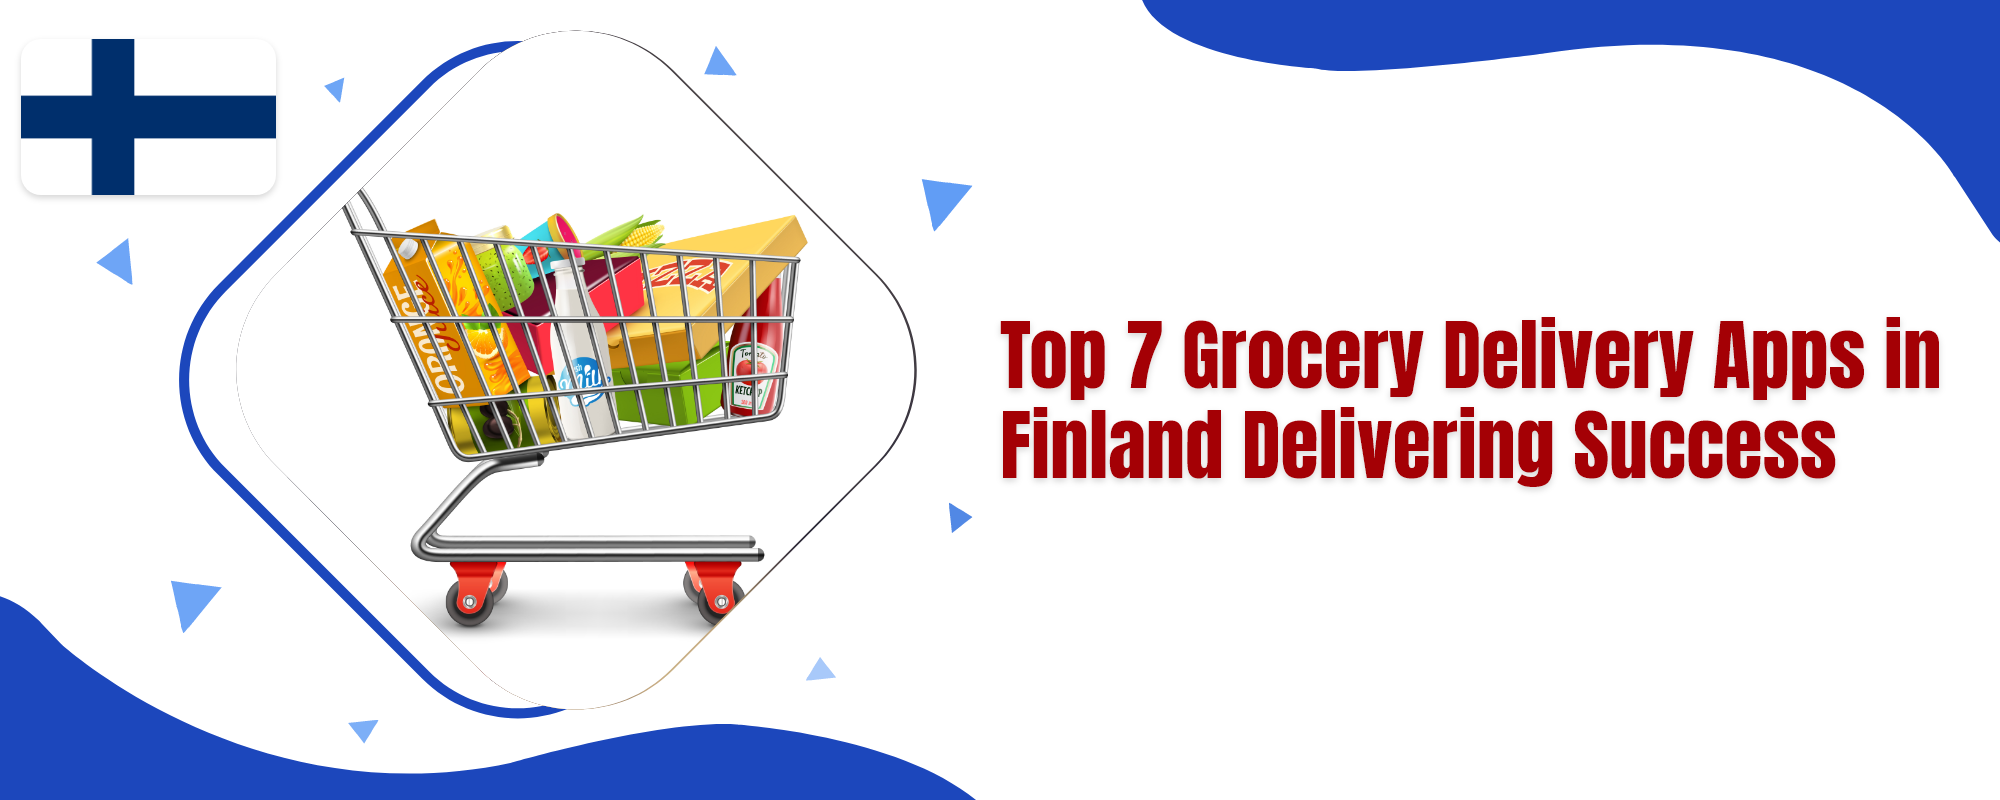 Grocery delivery apps in Finland